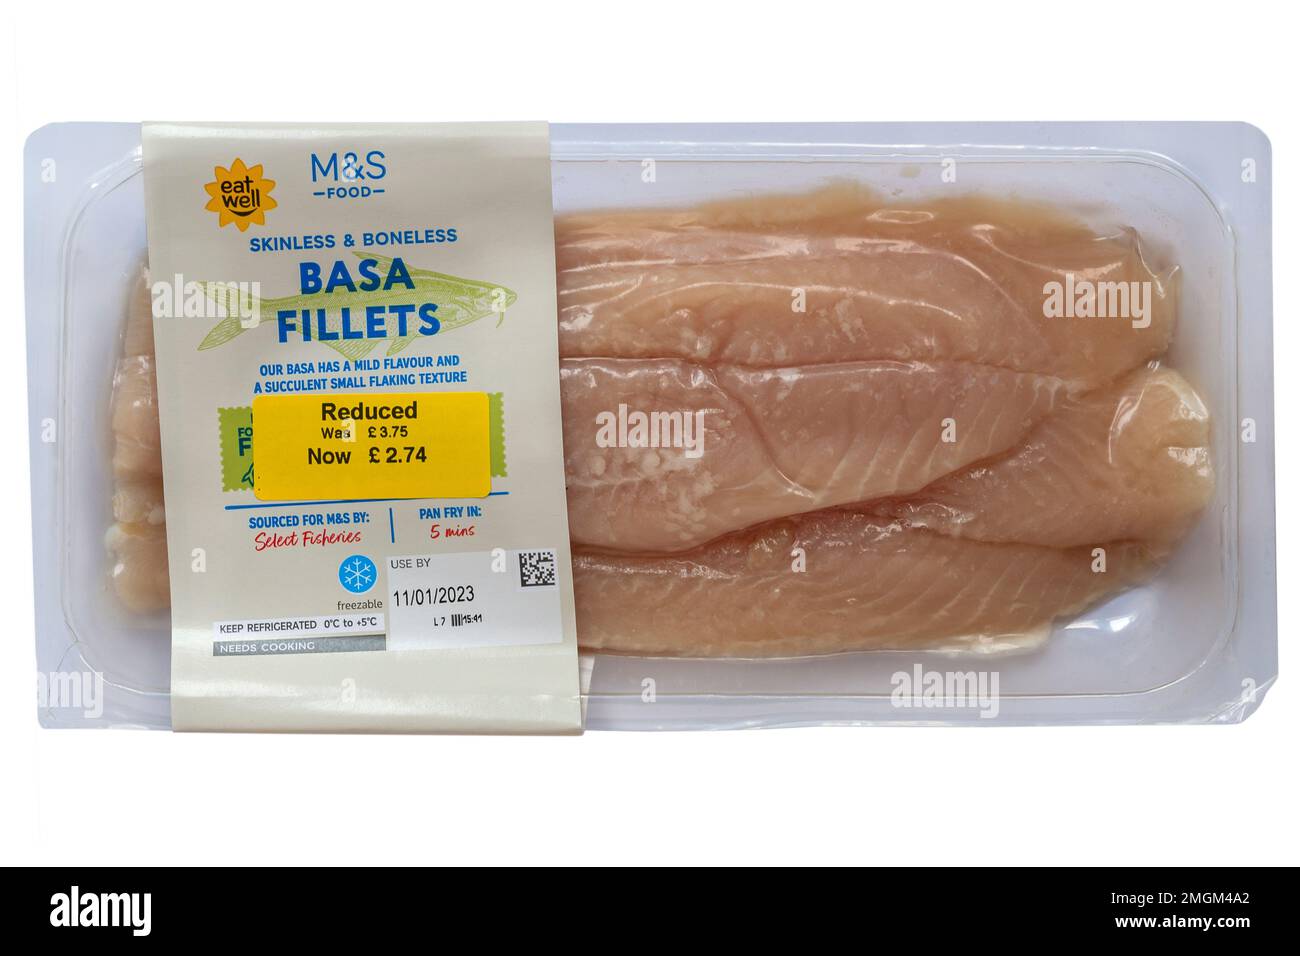 skinless & boneless Basa Fillets (Pangasius hypophthalmus) from M&S - our basa has a mild flavour and a succulent small flaking texture sold in UK Stock Photo